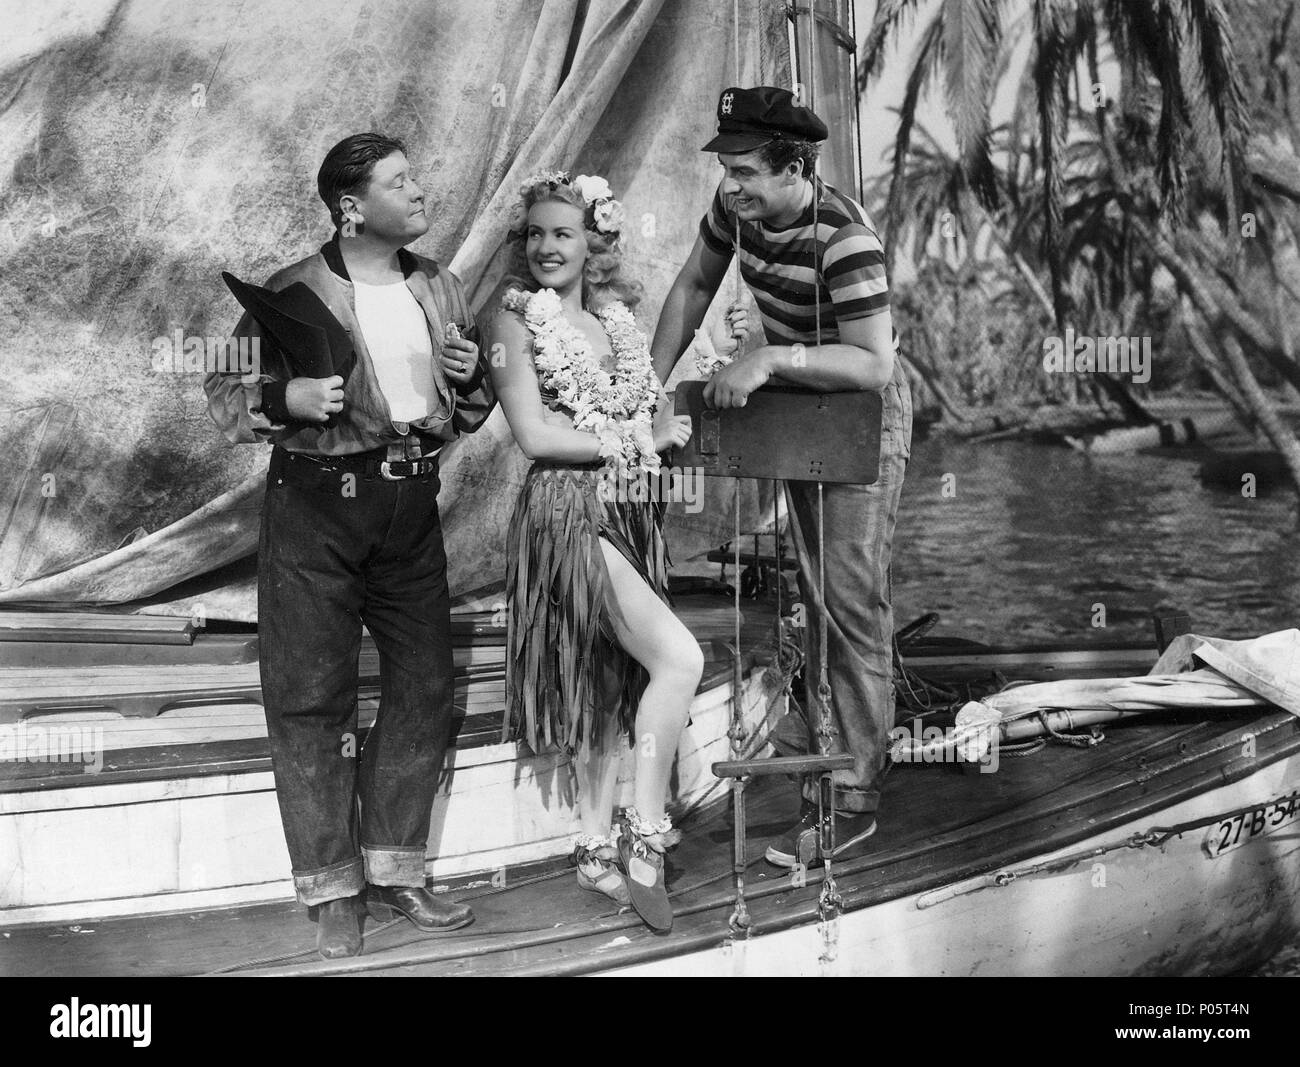 Original Film Title: SONG OF THE ISLANDS.  English Title: SONG OF THE ISLANDS.  Film Director: WALTER LANG.  Year: 1942.  Stars: VICTOR MATURE; BETTY GRABLE. Credit: 20TH CENTURY FOX / Album Stock Photo